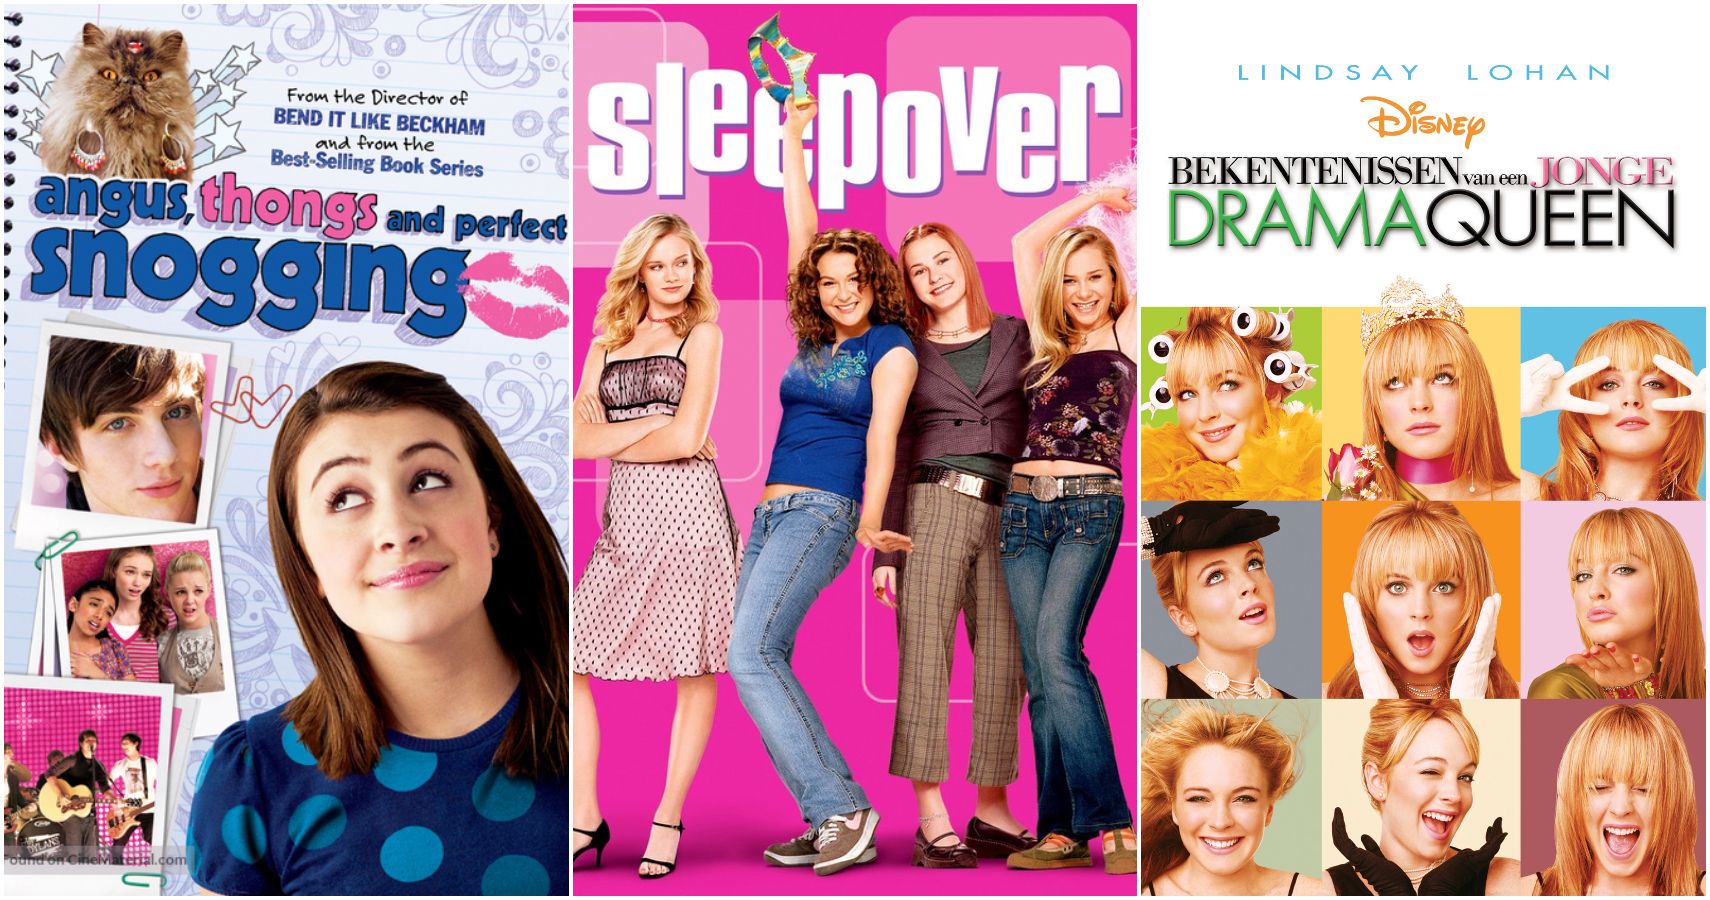 Best Of 2000s It Girl Movies